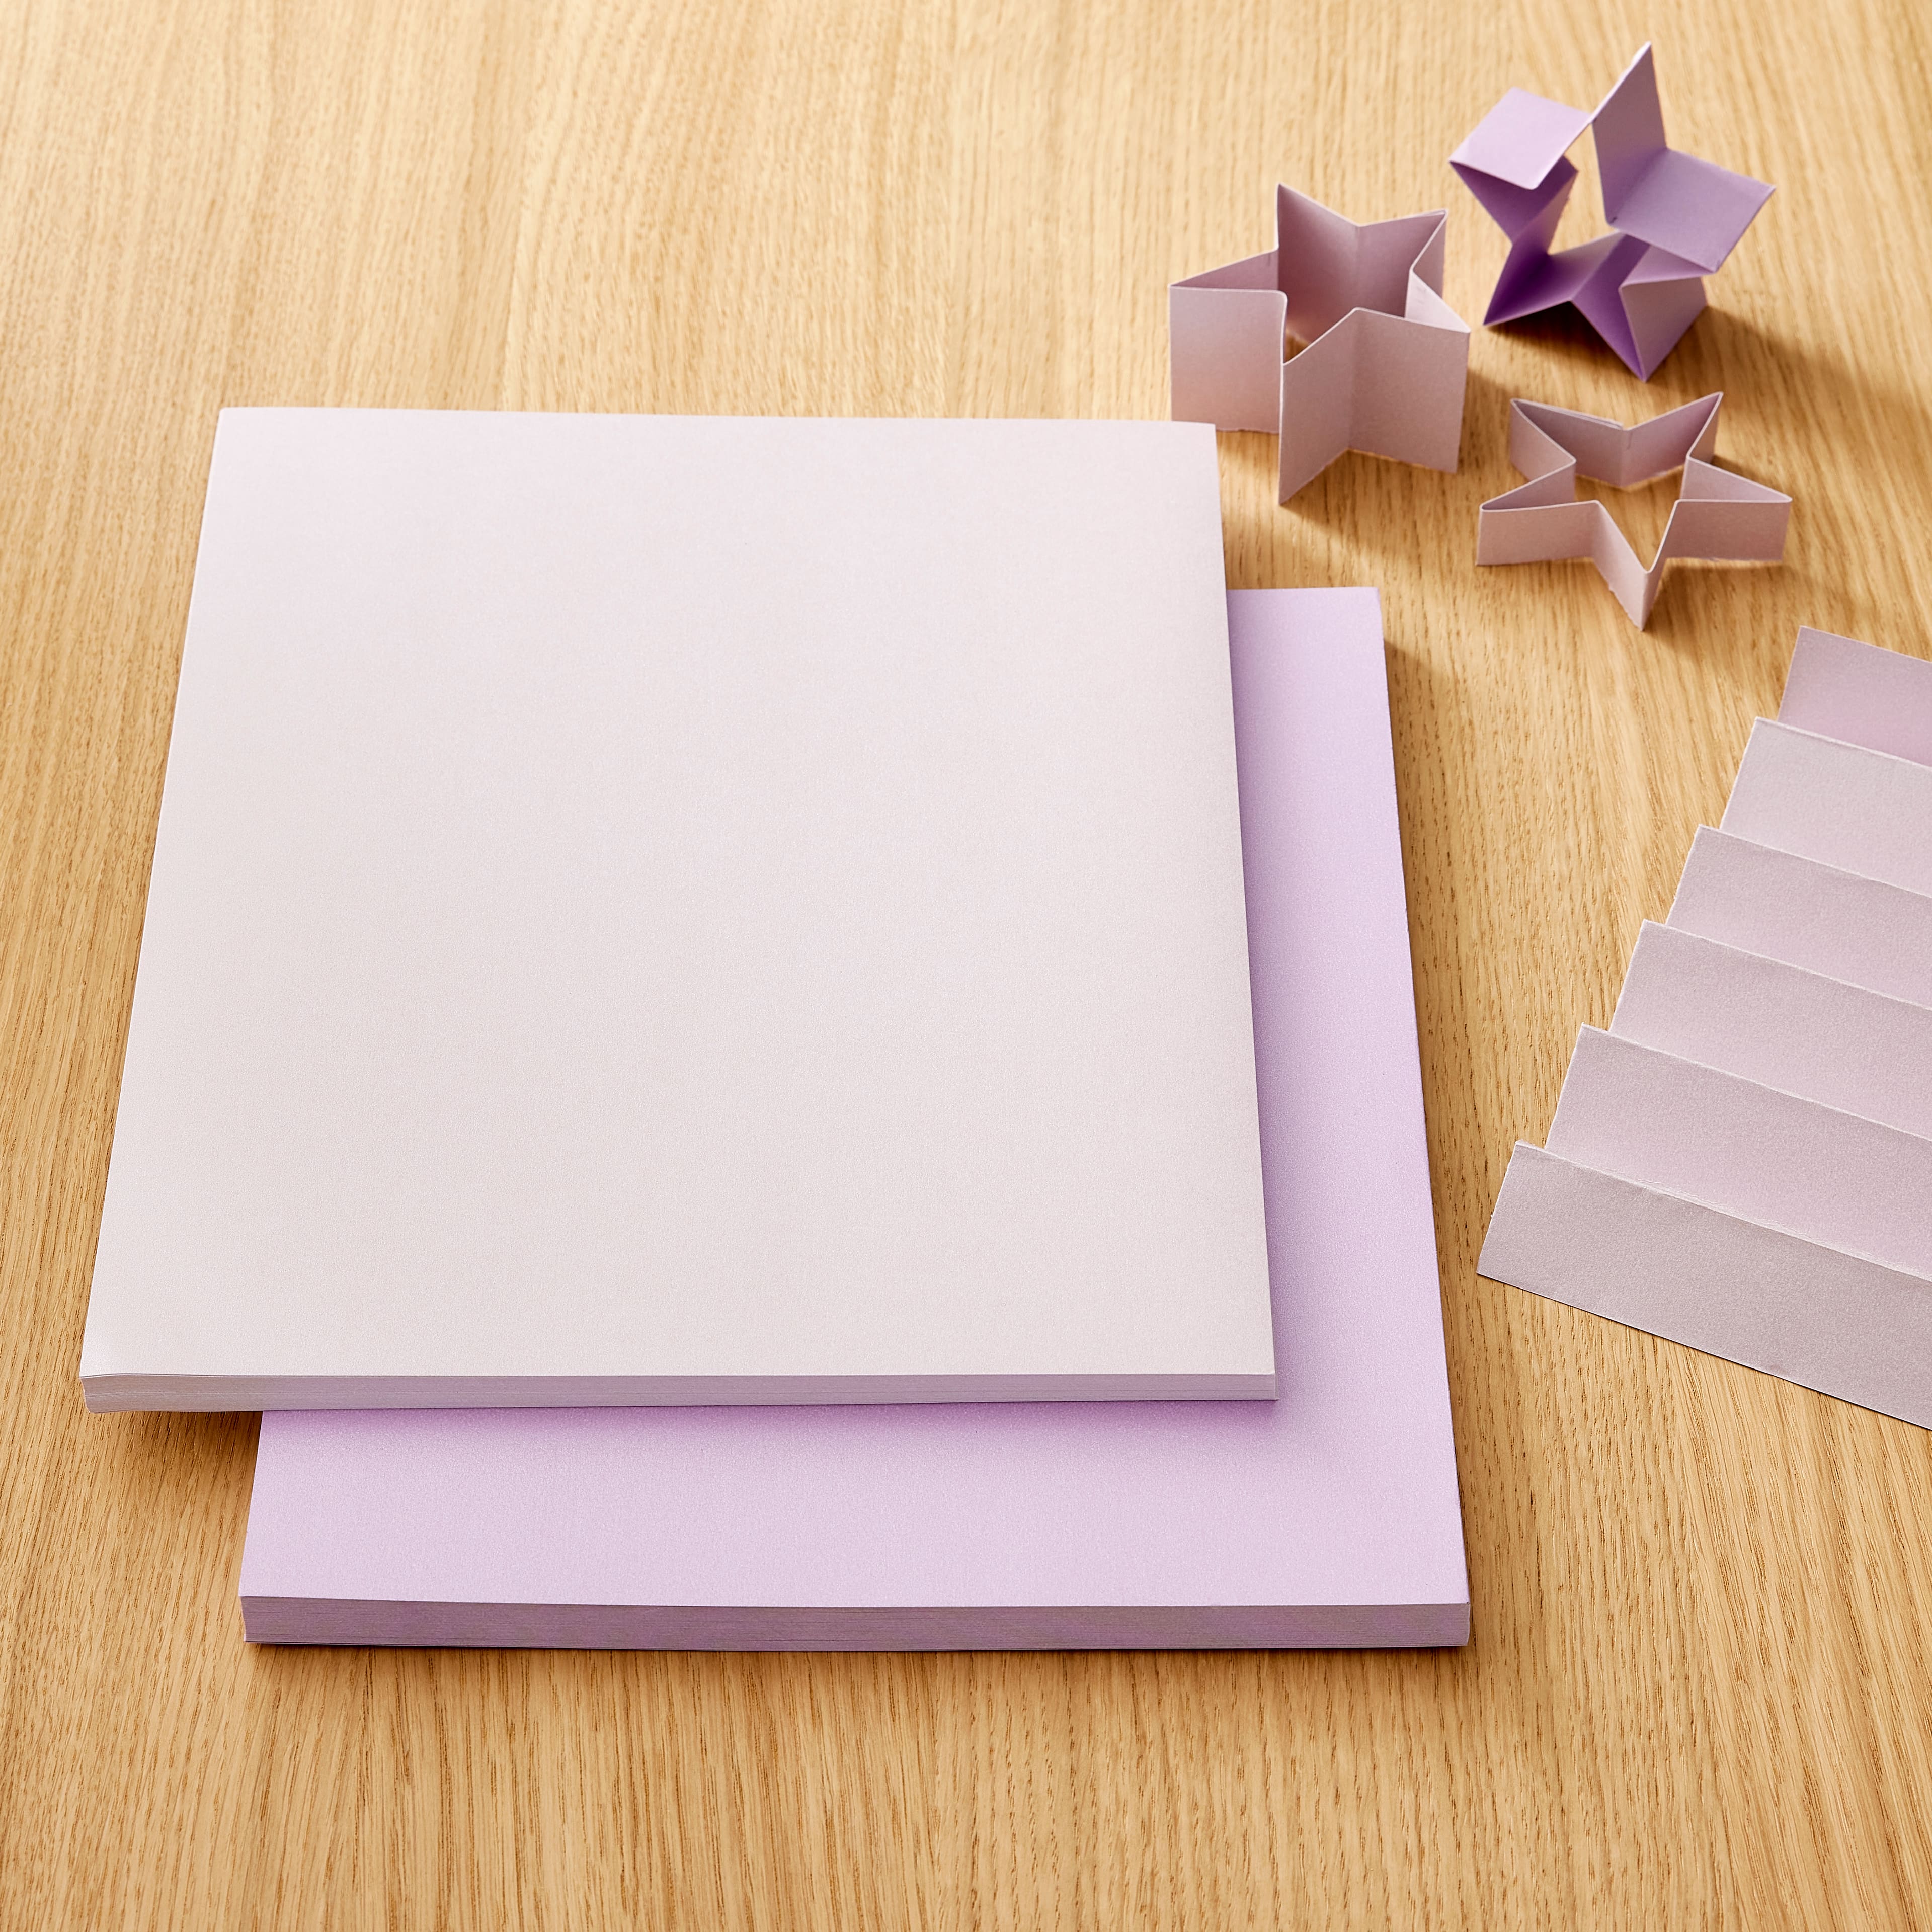 Purple Hues Shimmer 8.5&#x22; x 11&#x22; Cardstock Paper by Recollections&#x2122;, 100 Sheets